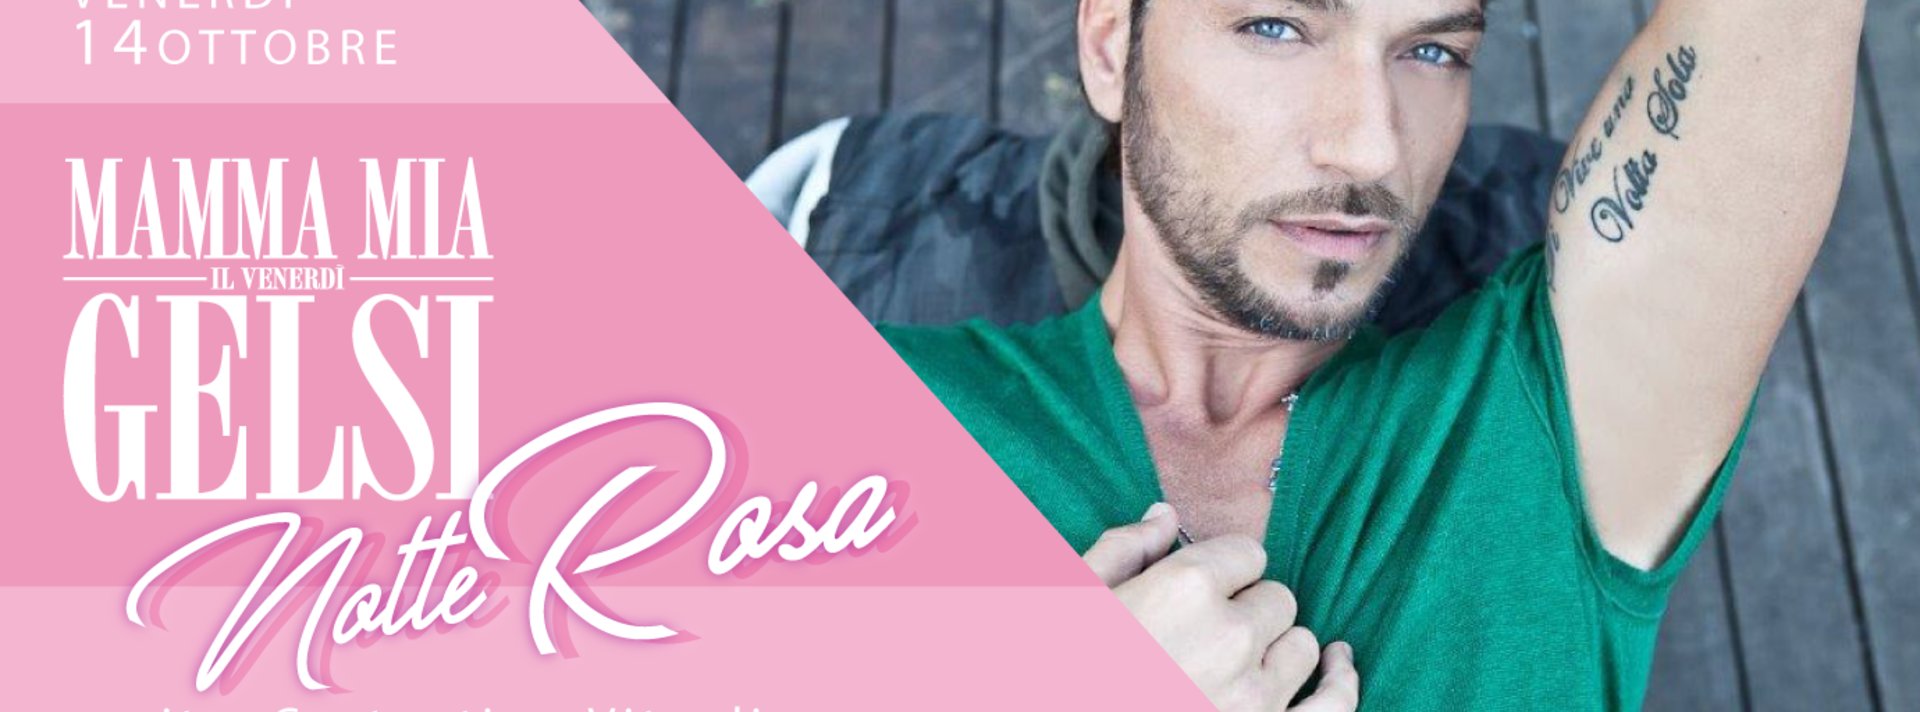 Costantino notte rosa banner